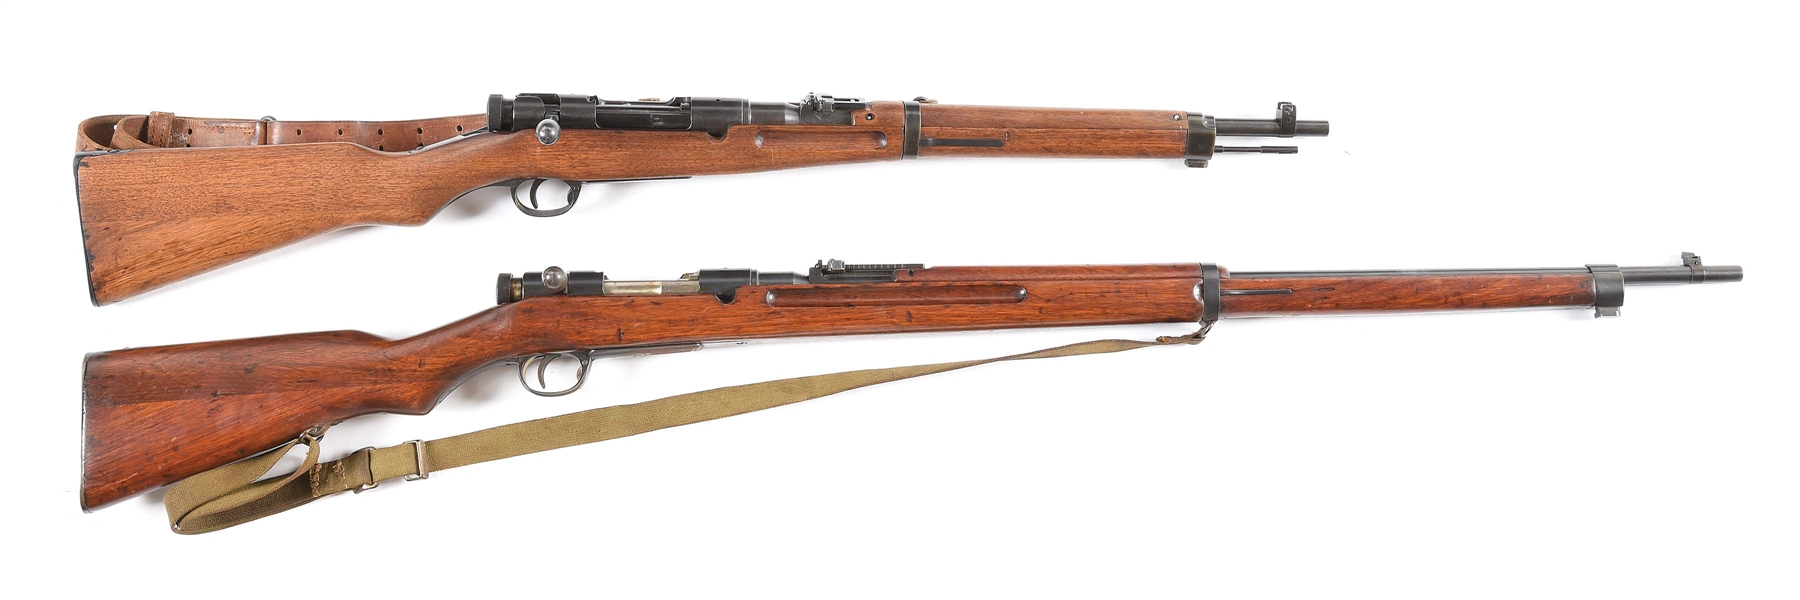 (C) LOT OF TWO: ARISAKA TYPE 38 BOLT ACTION CARBINE & RIFLE